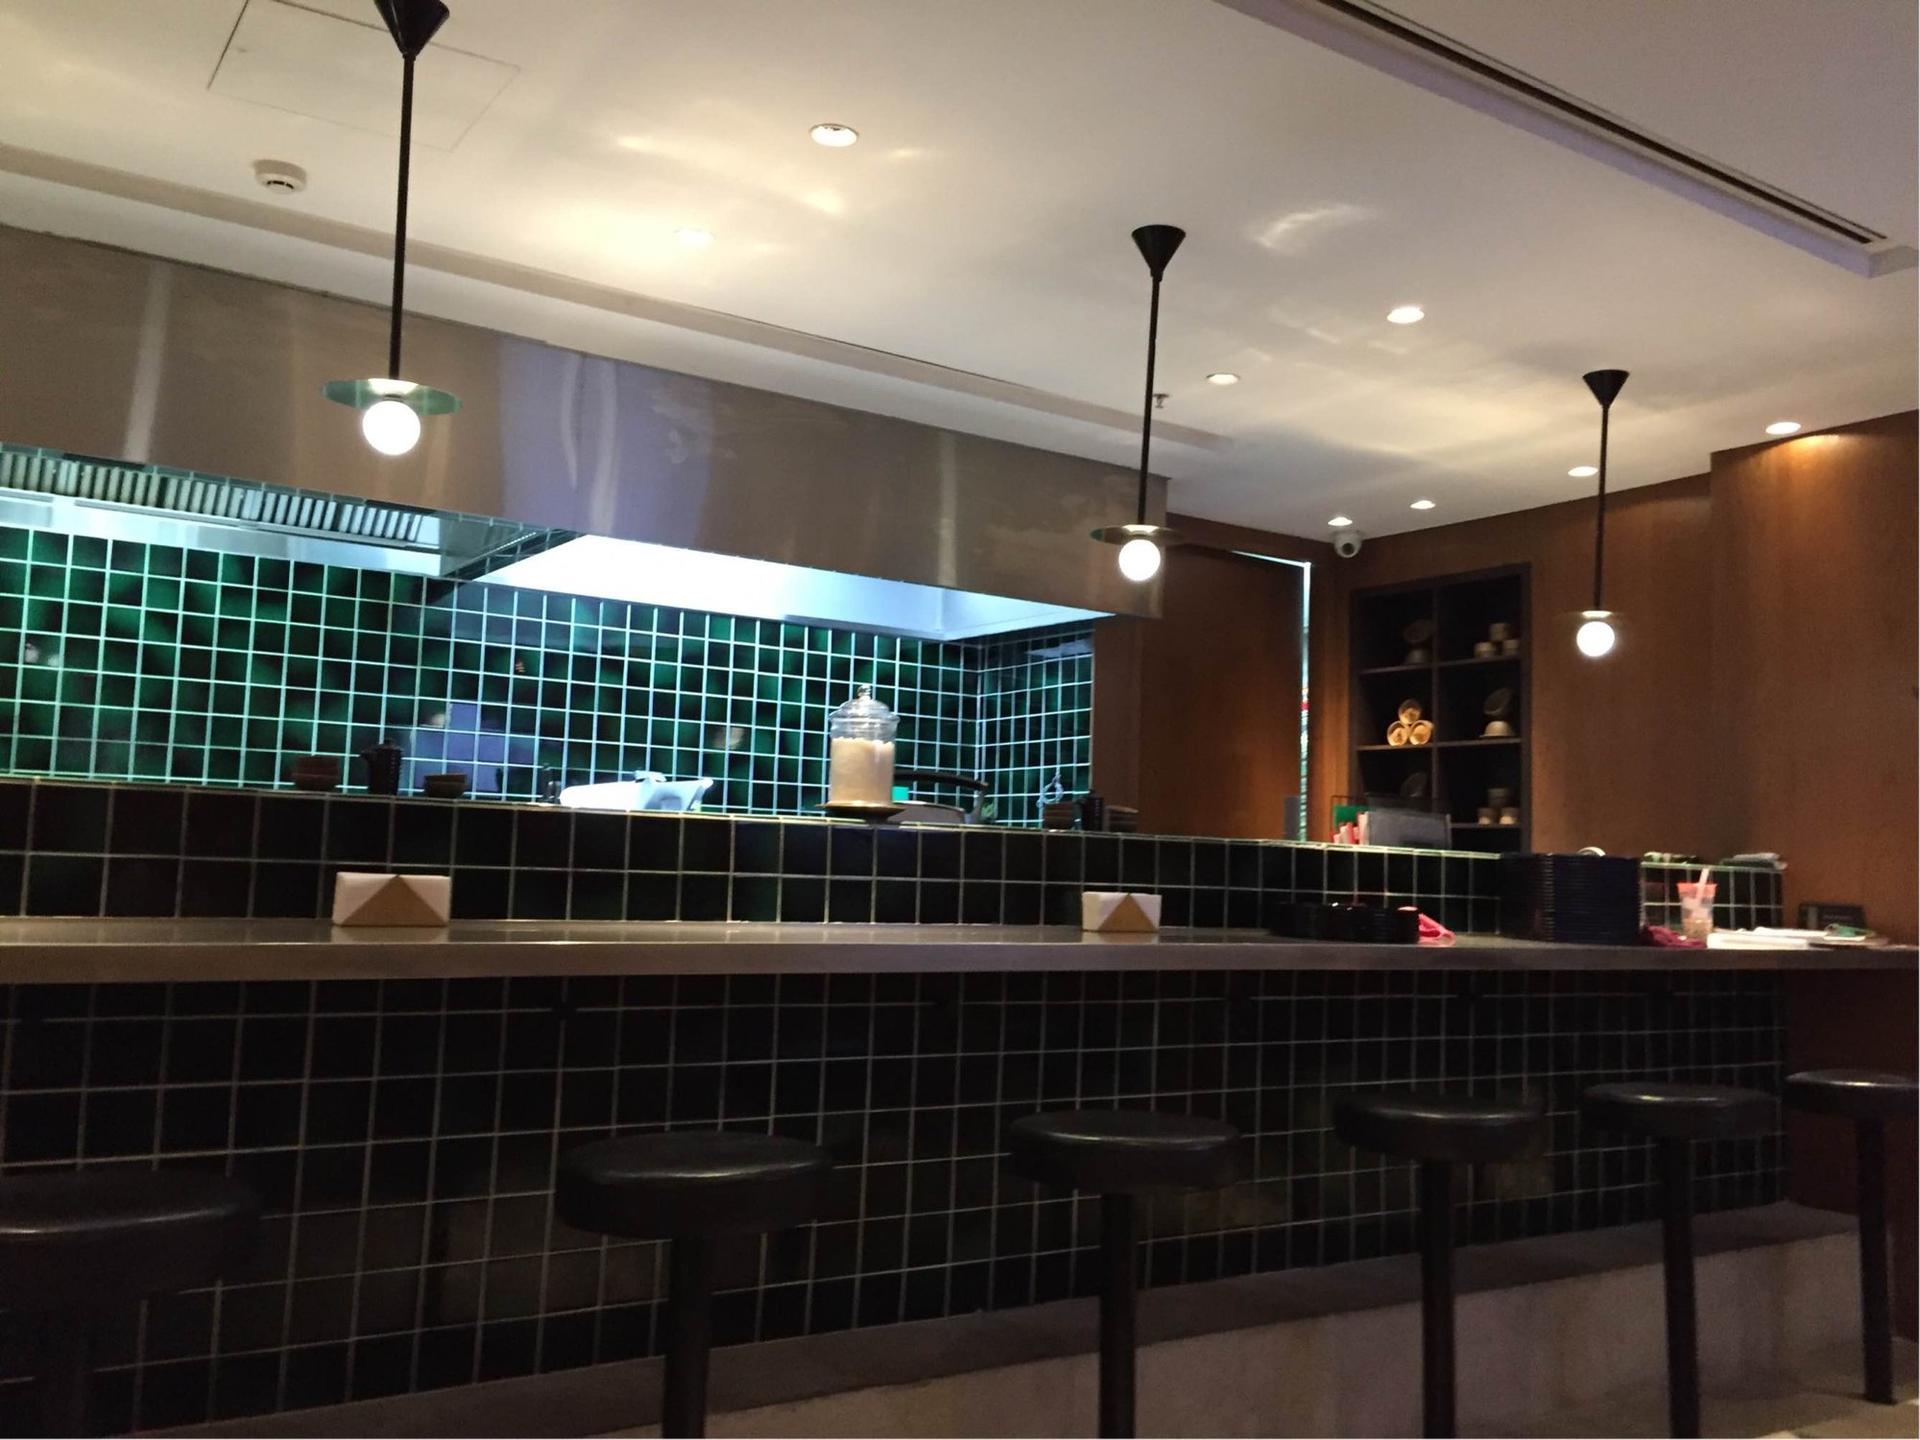 Cathay Pacific First and Business Class Lounge image 17 of 19